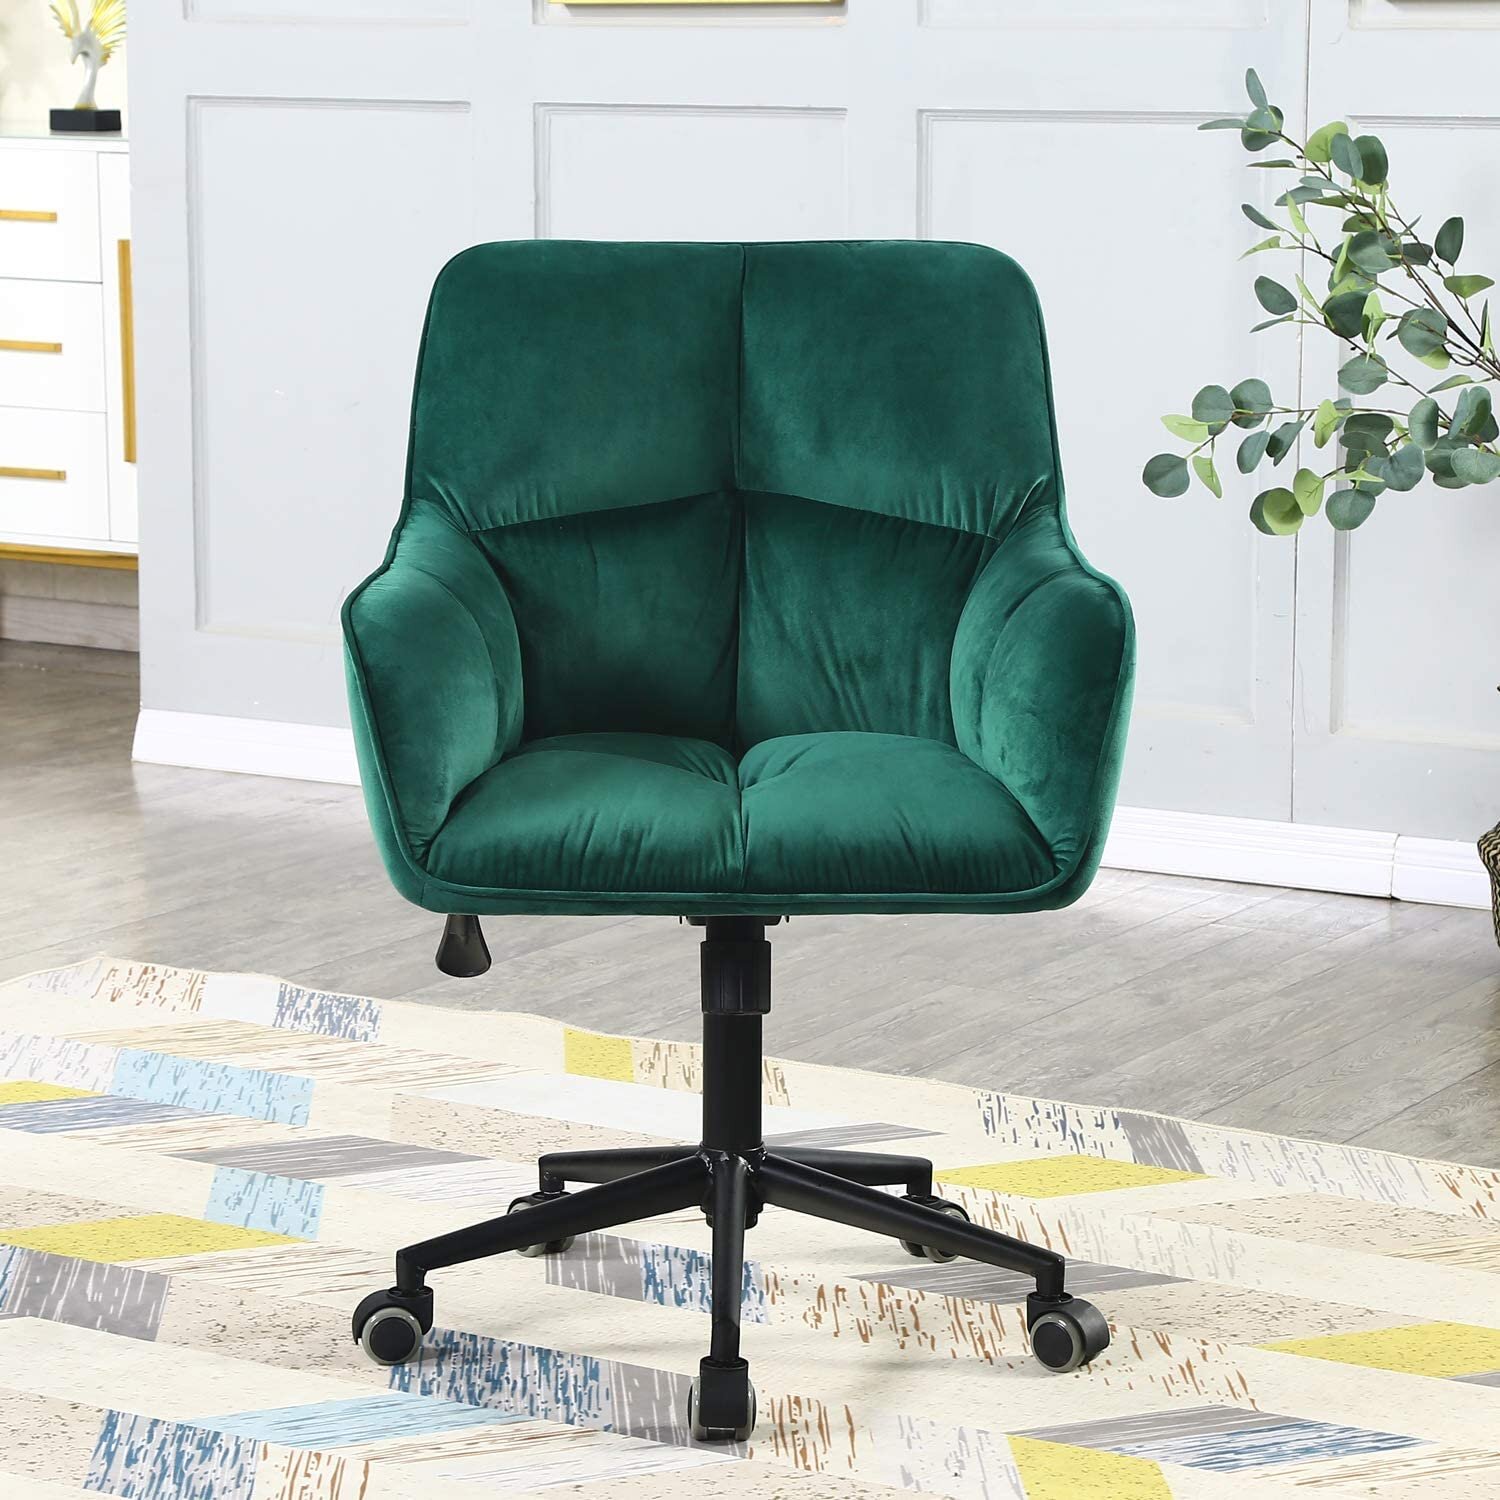 Desk Chair Modern Simple Mid-Back Velvet Upholstered Swivel Home Office Chair with Arms and Adjustable Height for Small Spaces Home Office Living Room Bedroom Green